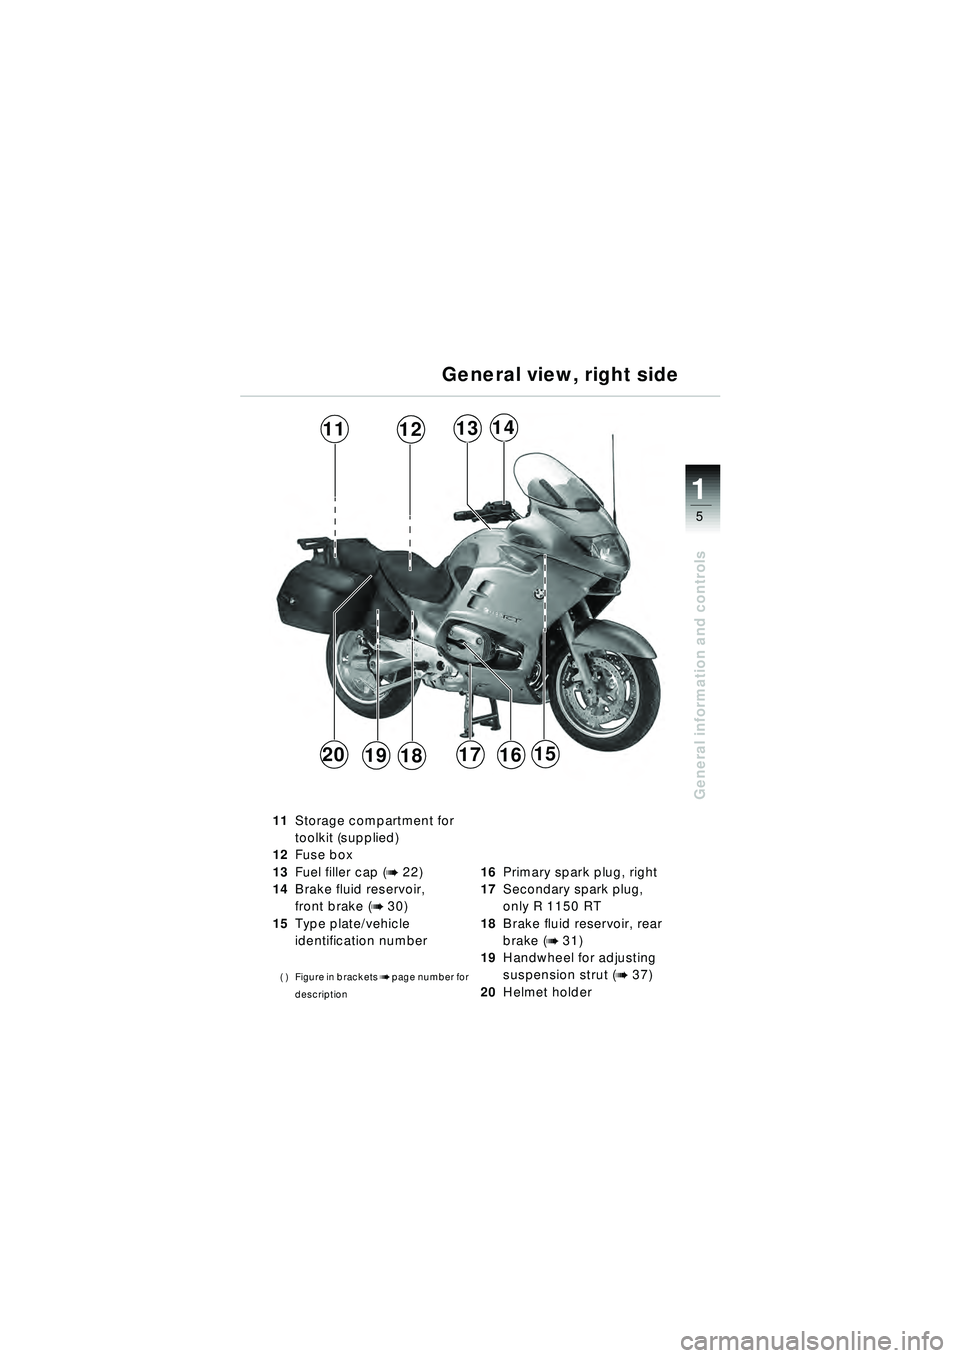 BMW MOTORRAD R 1150 RT 2002  Riders Manual (in English) 5
General information and controls
1
1413
181519
1211
171620
11Storage compartment for 
toolkit (supplied) 
12 Fuse box 
13 Fuel filler cap (
b 22)
14 Brake fluid reservoir, 
front brake (
b 30)
15 Ty